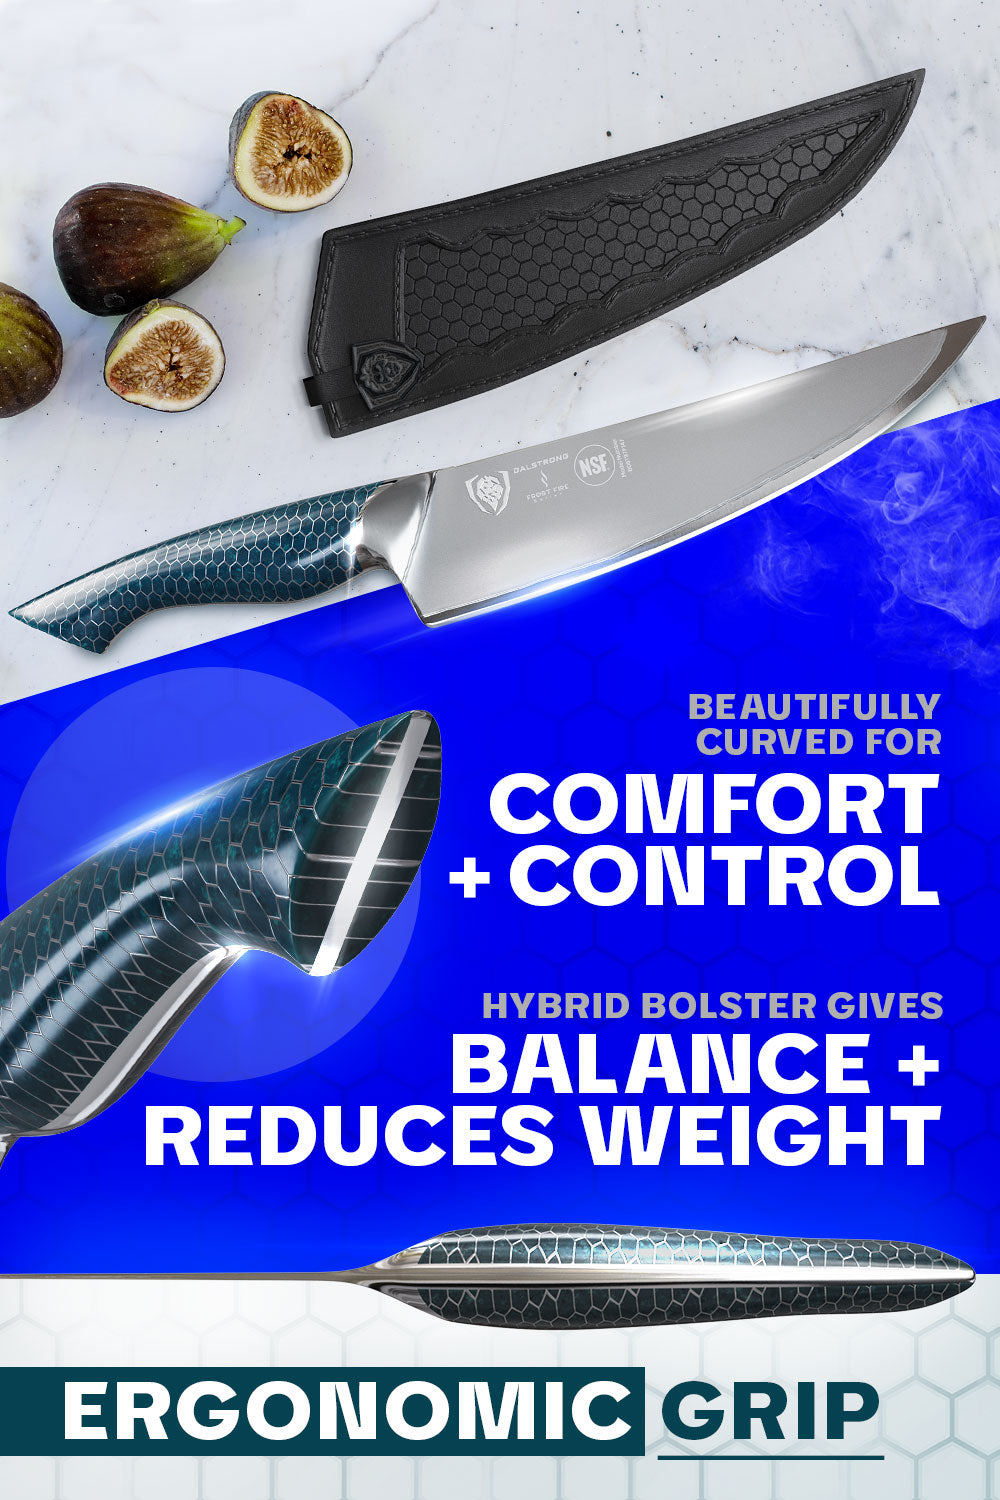 Dalstrong frost fire series 8 inch chef knife featuring it's comfortable and ergonomic blue honeycomb handle.